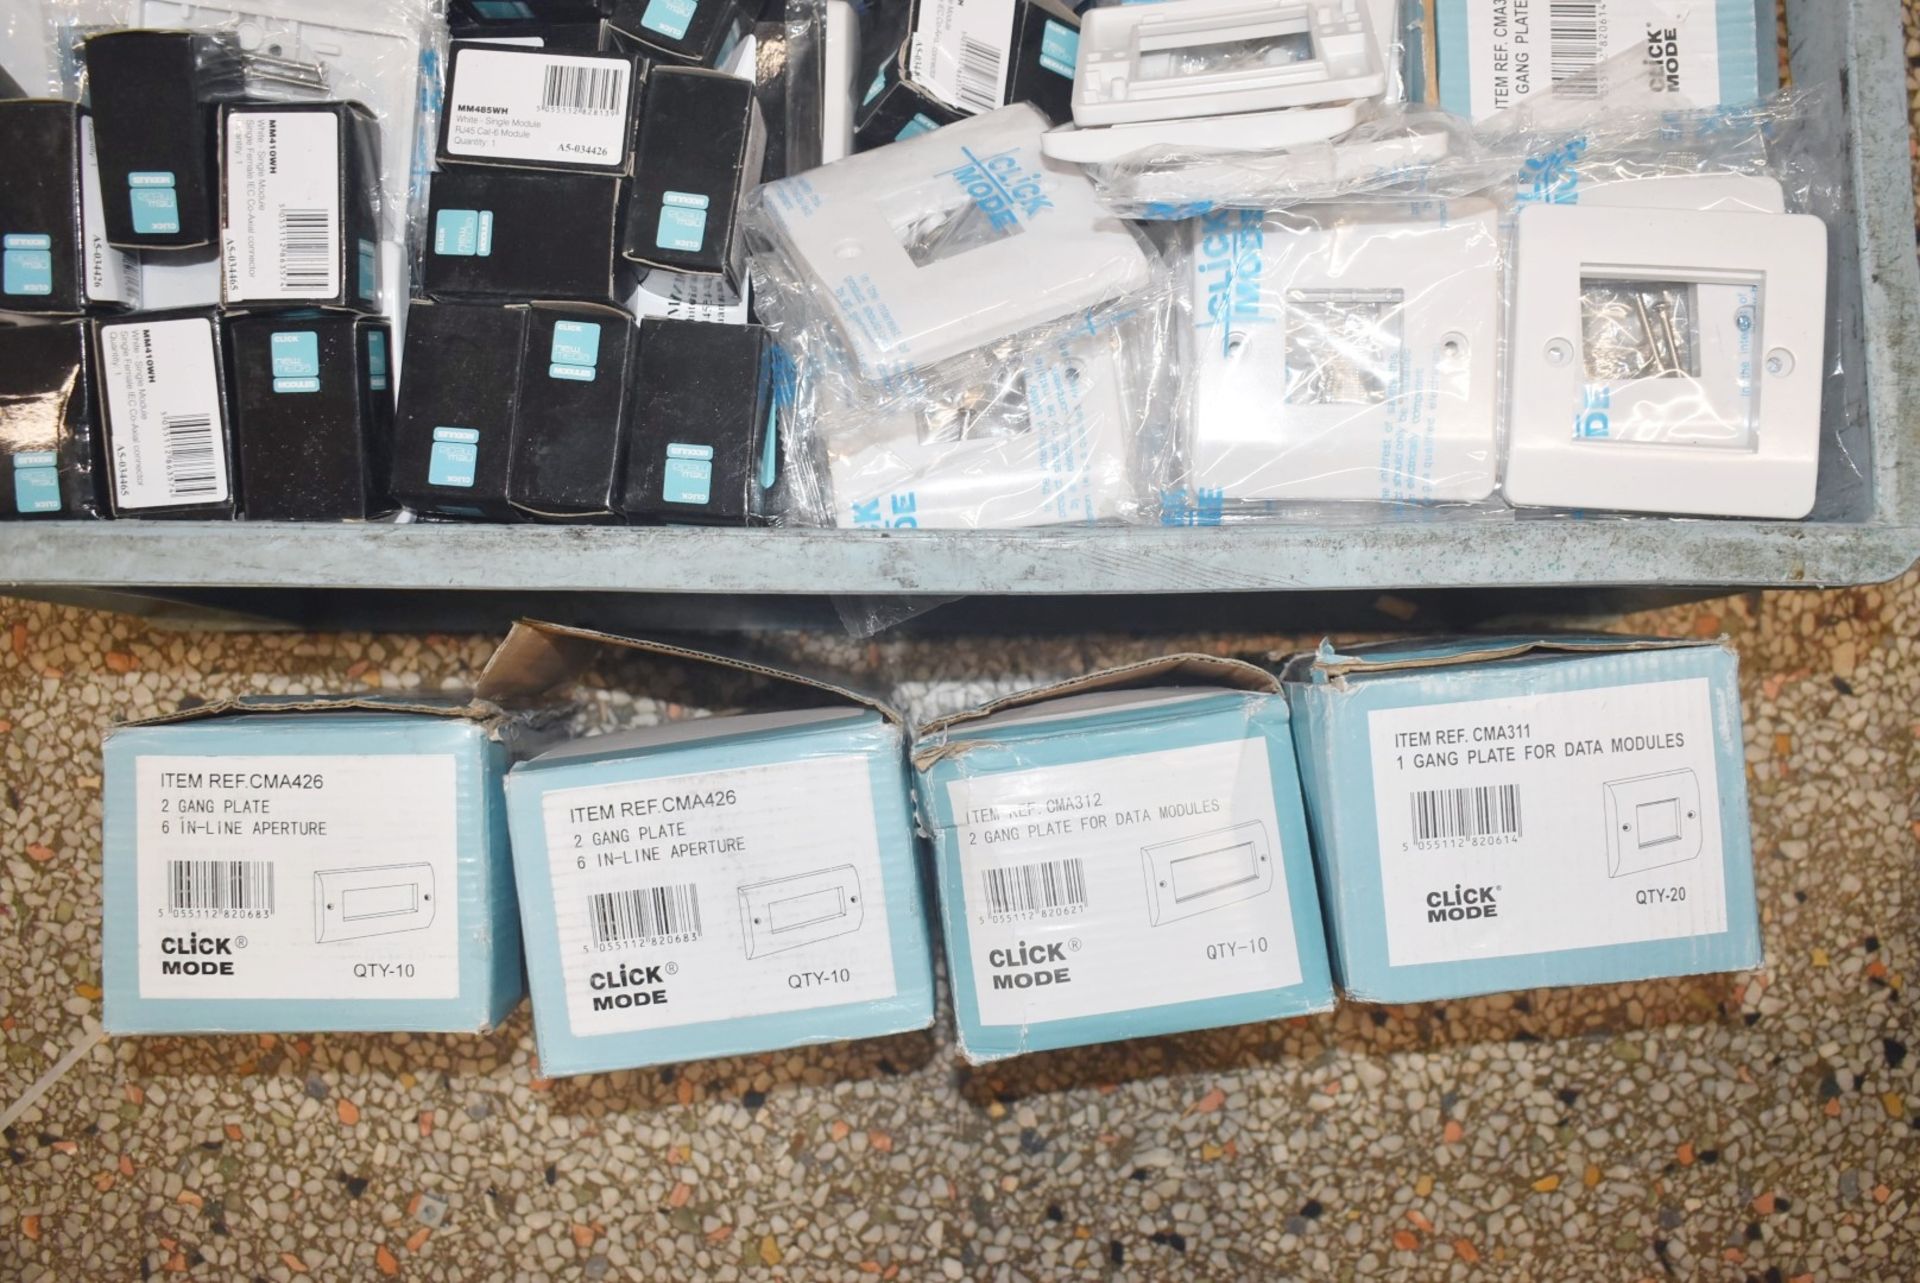 1 x Box of Gang Plates and RJ45 Modules - Unused Stock - Ref: SRB241 - CL816 - Location: Birmingham, - Image 7 of 8